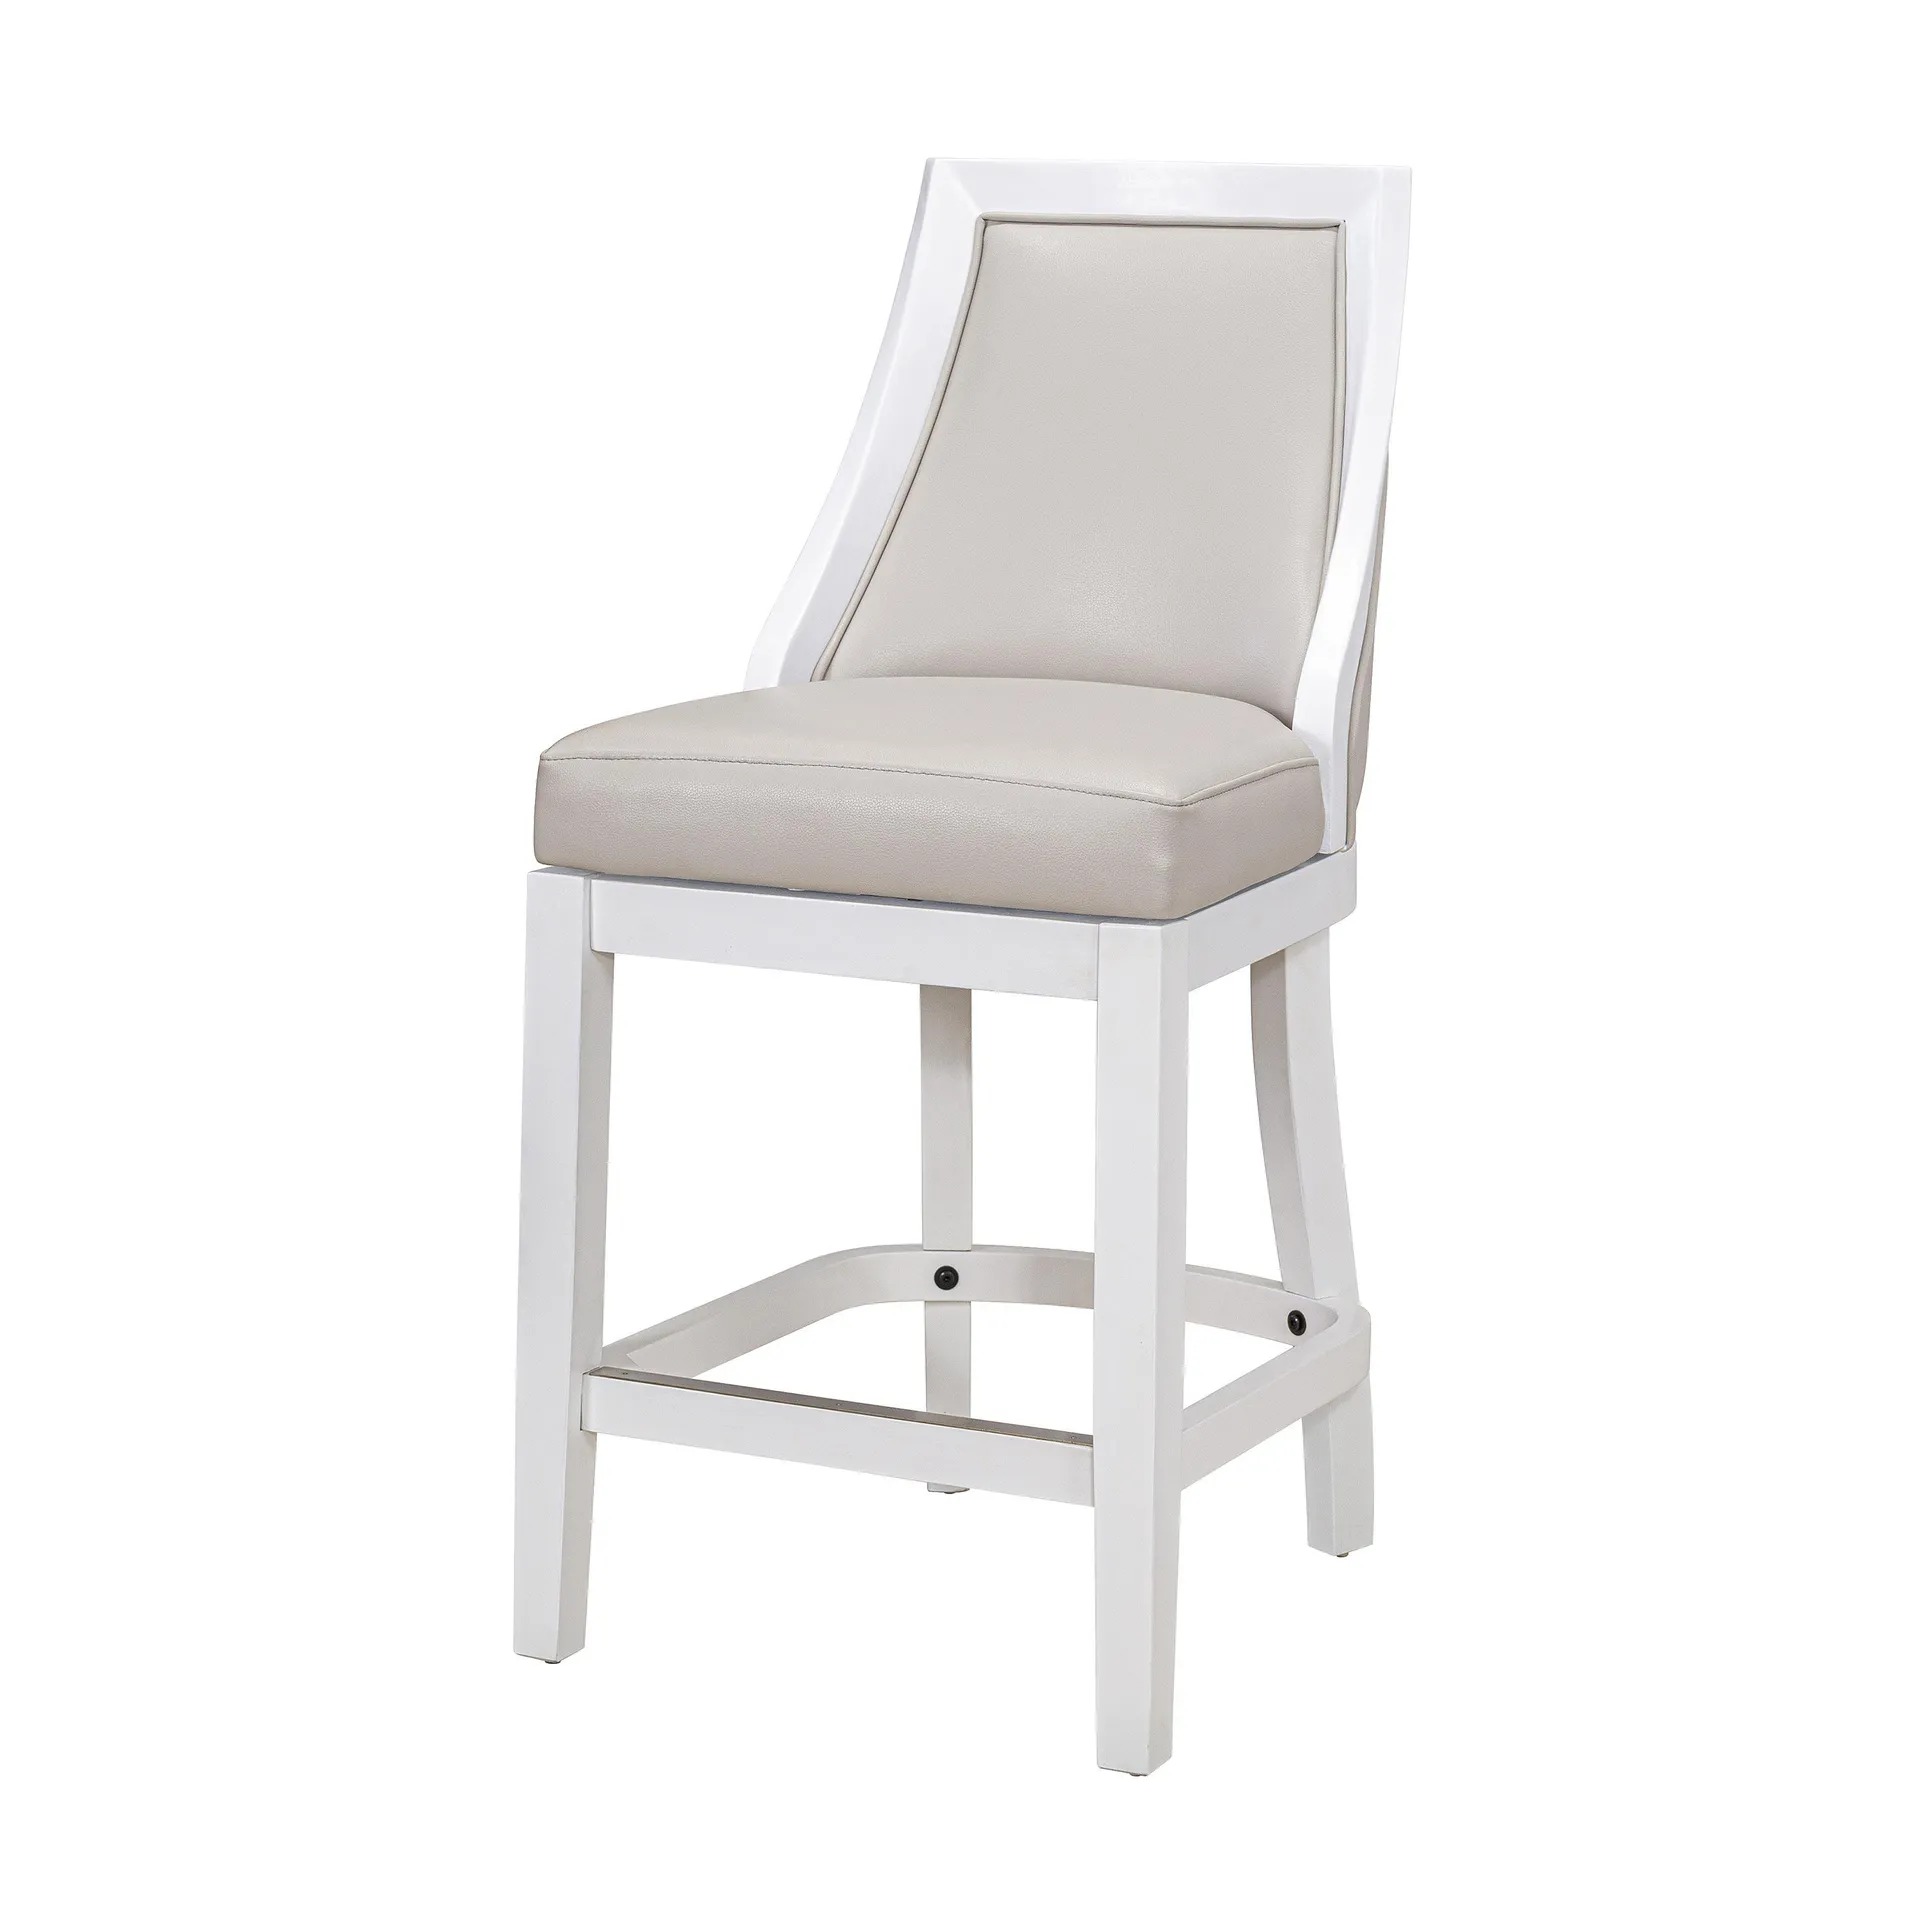 Counter-Height Swivel Bar Stool with Tall Back, 26"H - Alabaster White